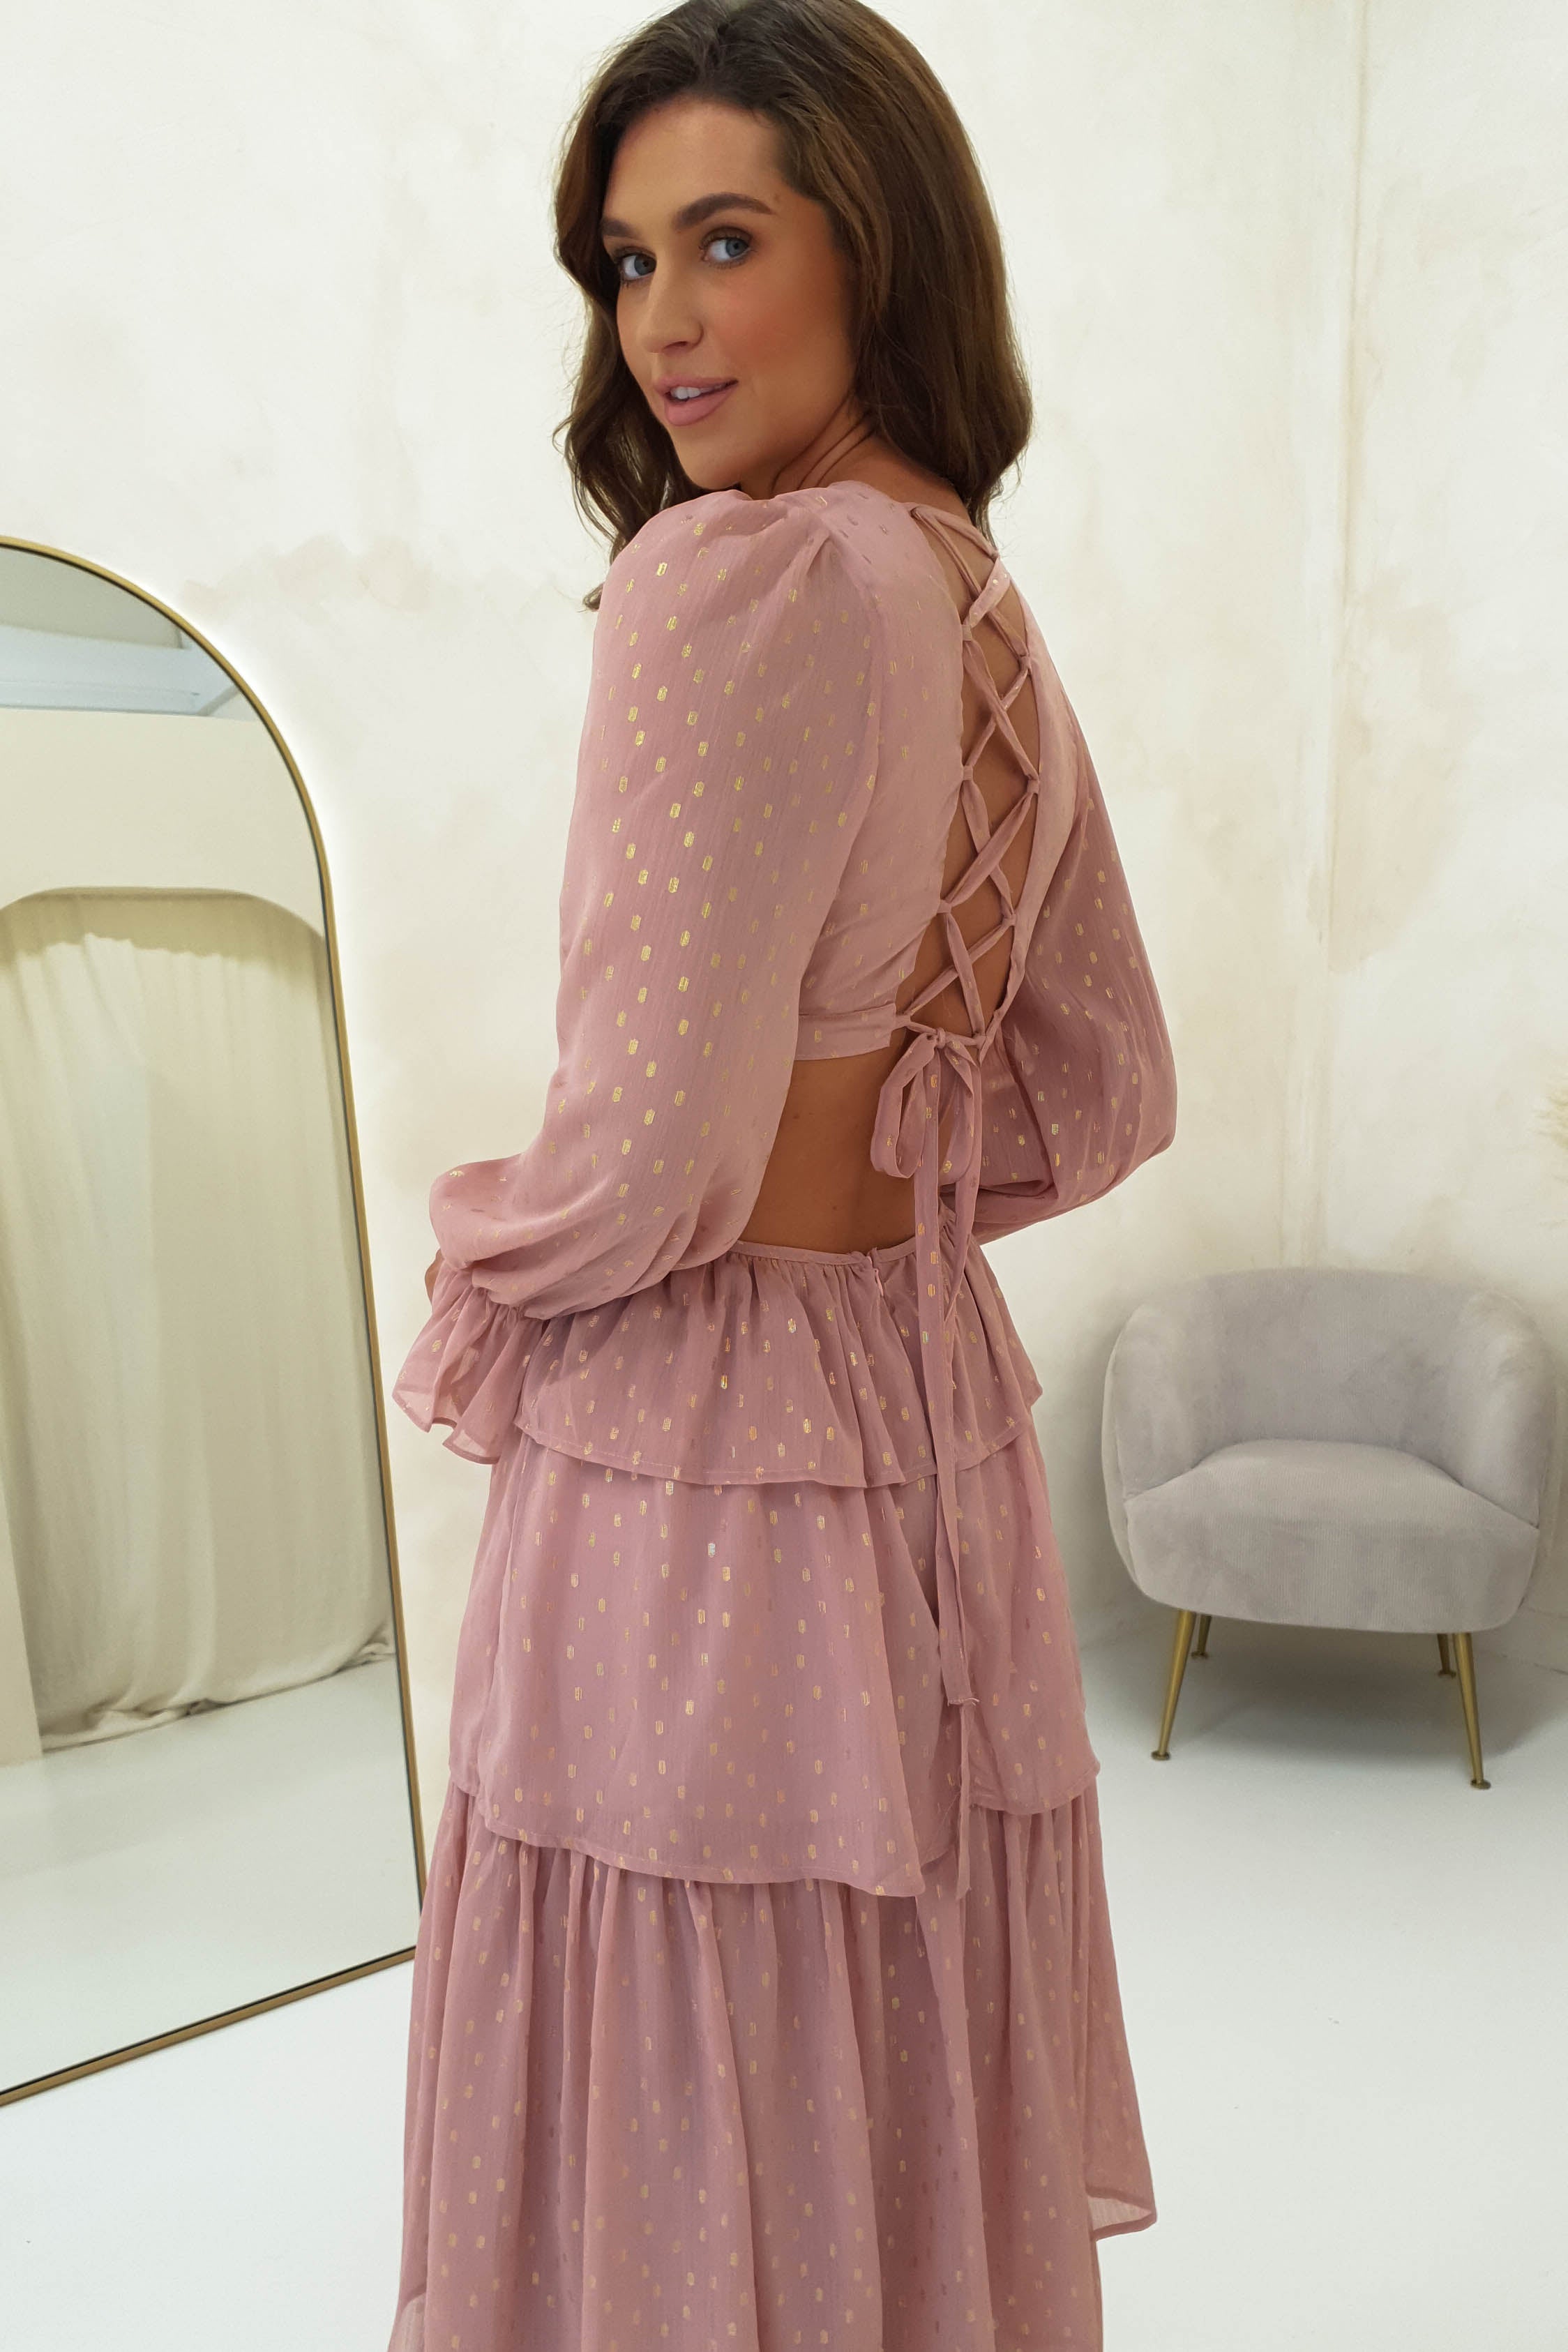 done-idk7219-dusty-pink-long-sleeve-gown-with-lace-up-back-dusty-pink-ina-dresses-50421863088469.jpg